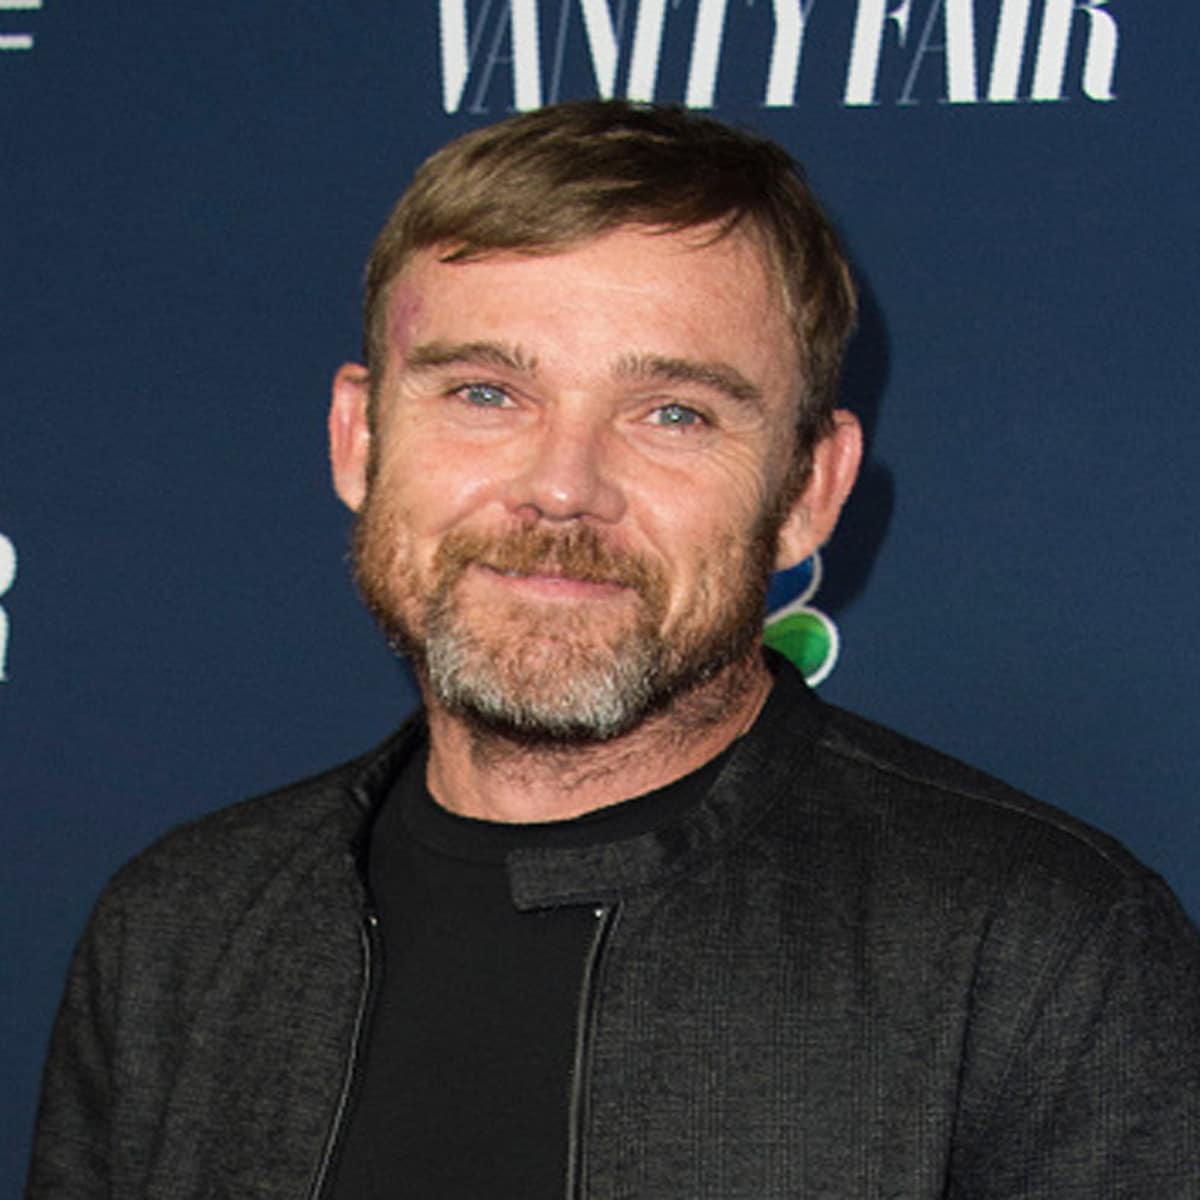 actor ricky schroder poses at vanity fair event